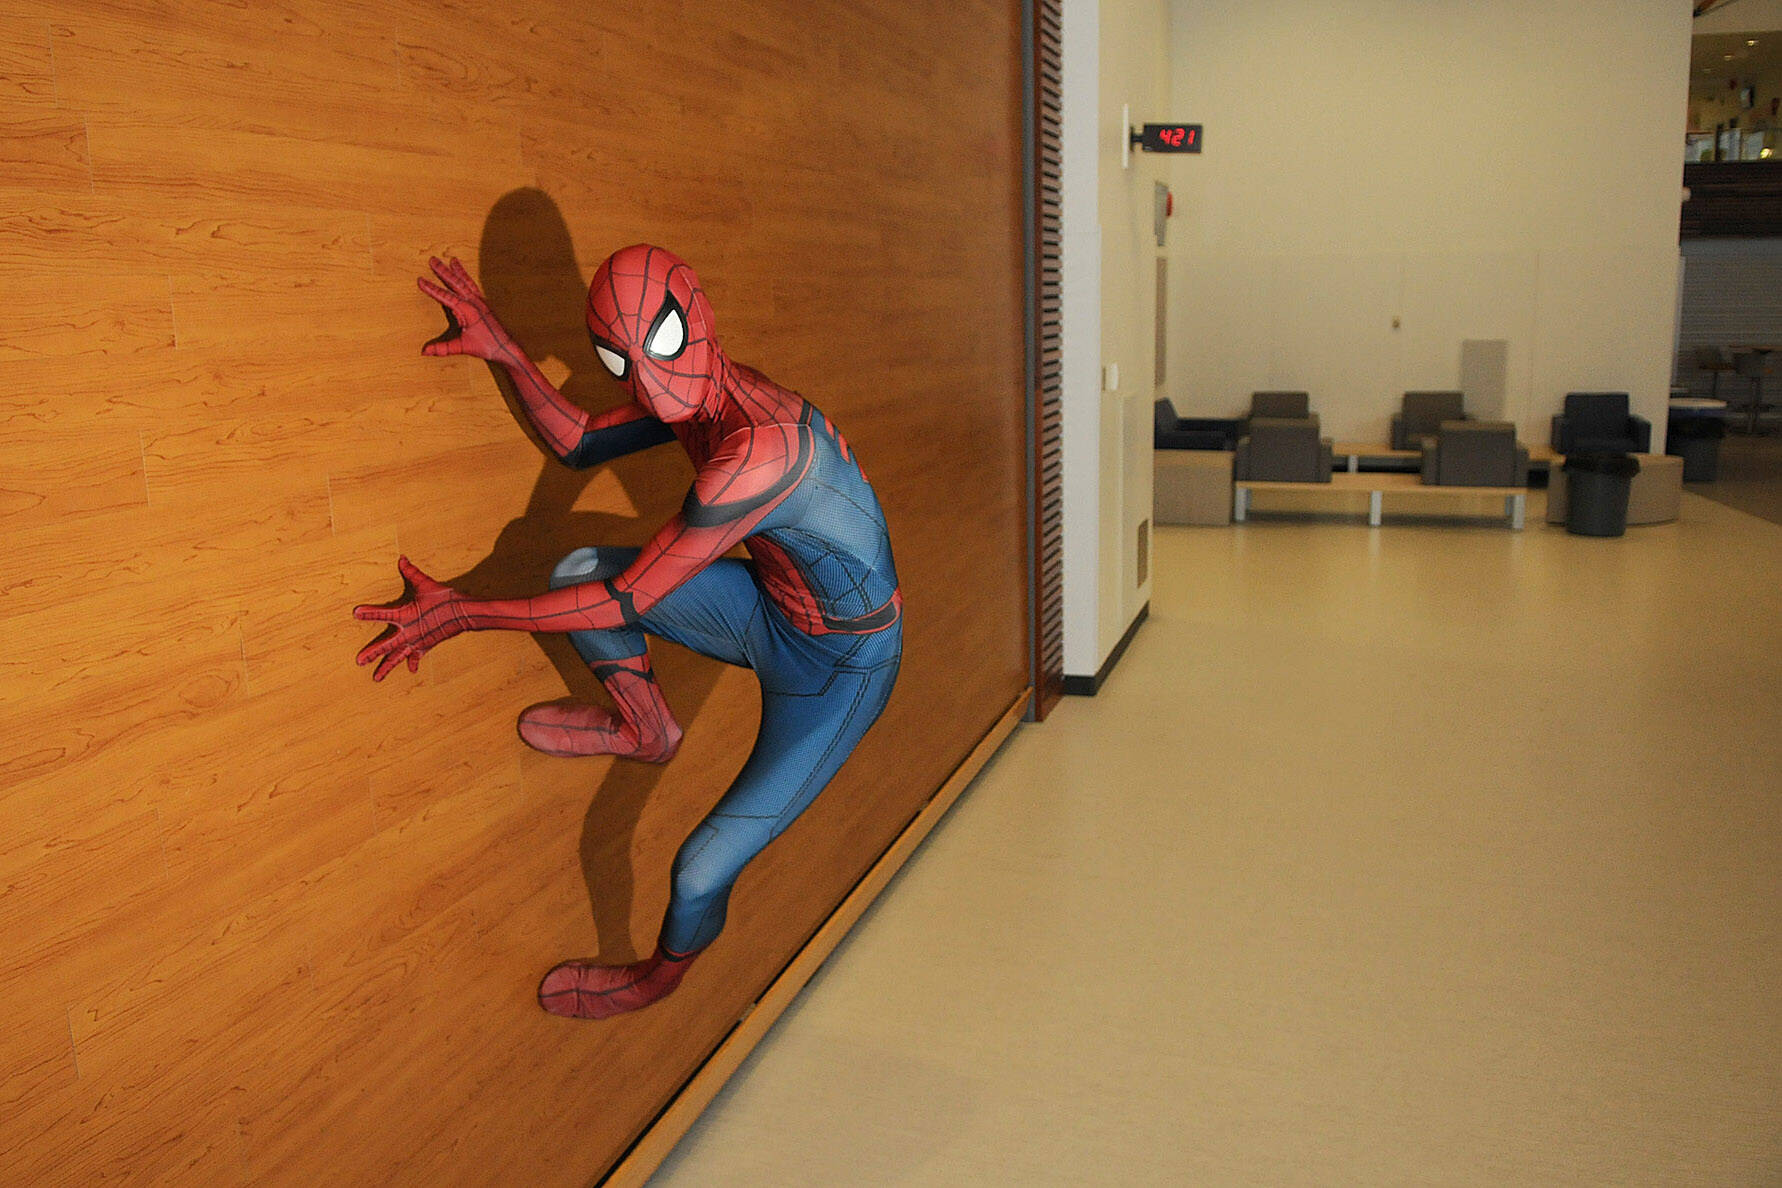 Kolton Visser takes on the role of Spider-Man at Chilliwack Secondary School on Feb. 15, 2017 when he was 17 years old. Monday, Aug. 1, 2022 is Spider-Man Day. (Jenna Hauck/ Chilliwack Progress file)